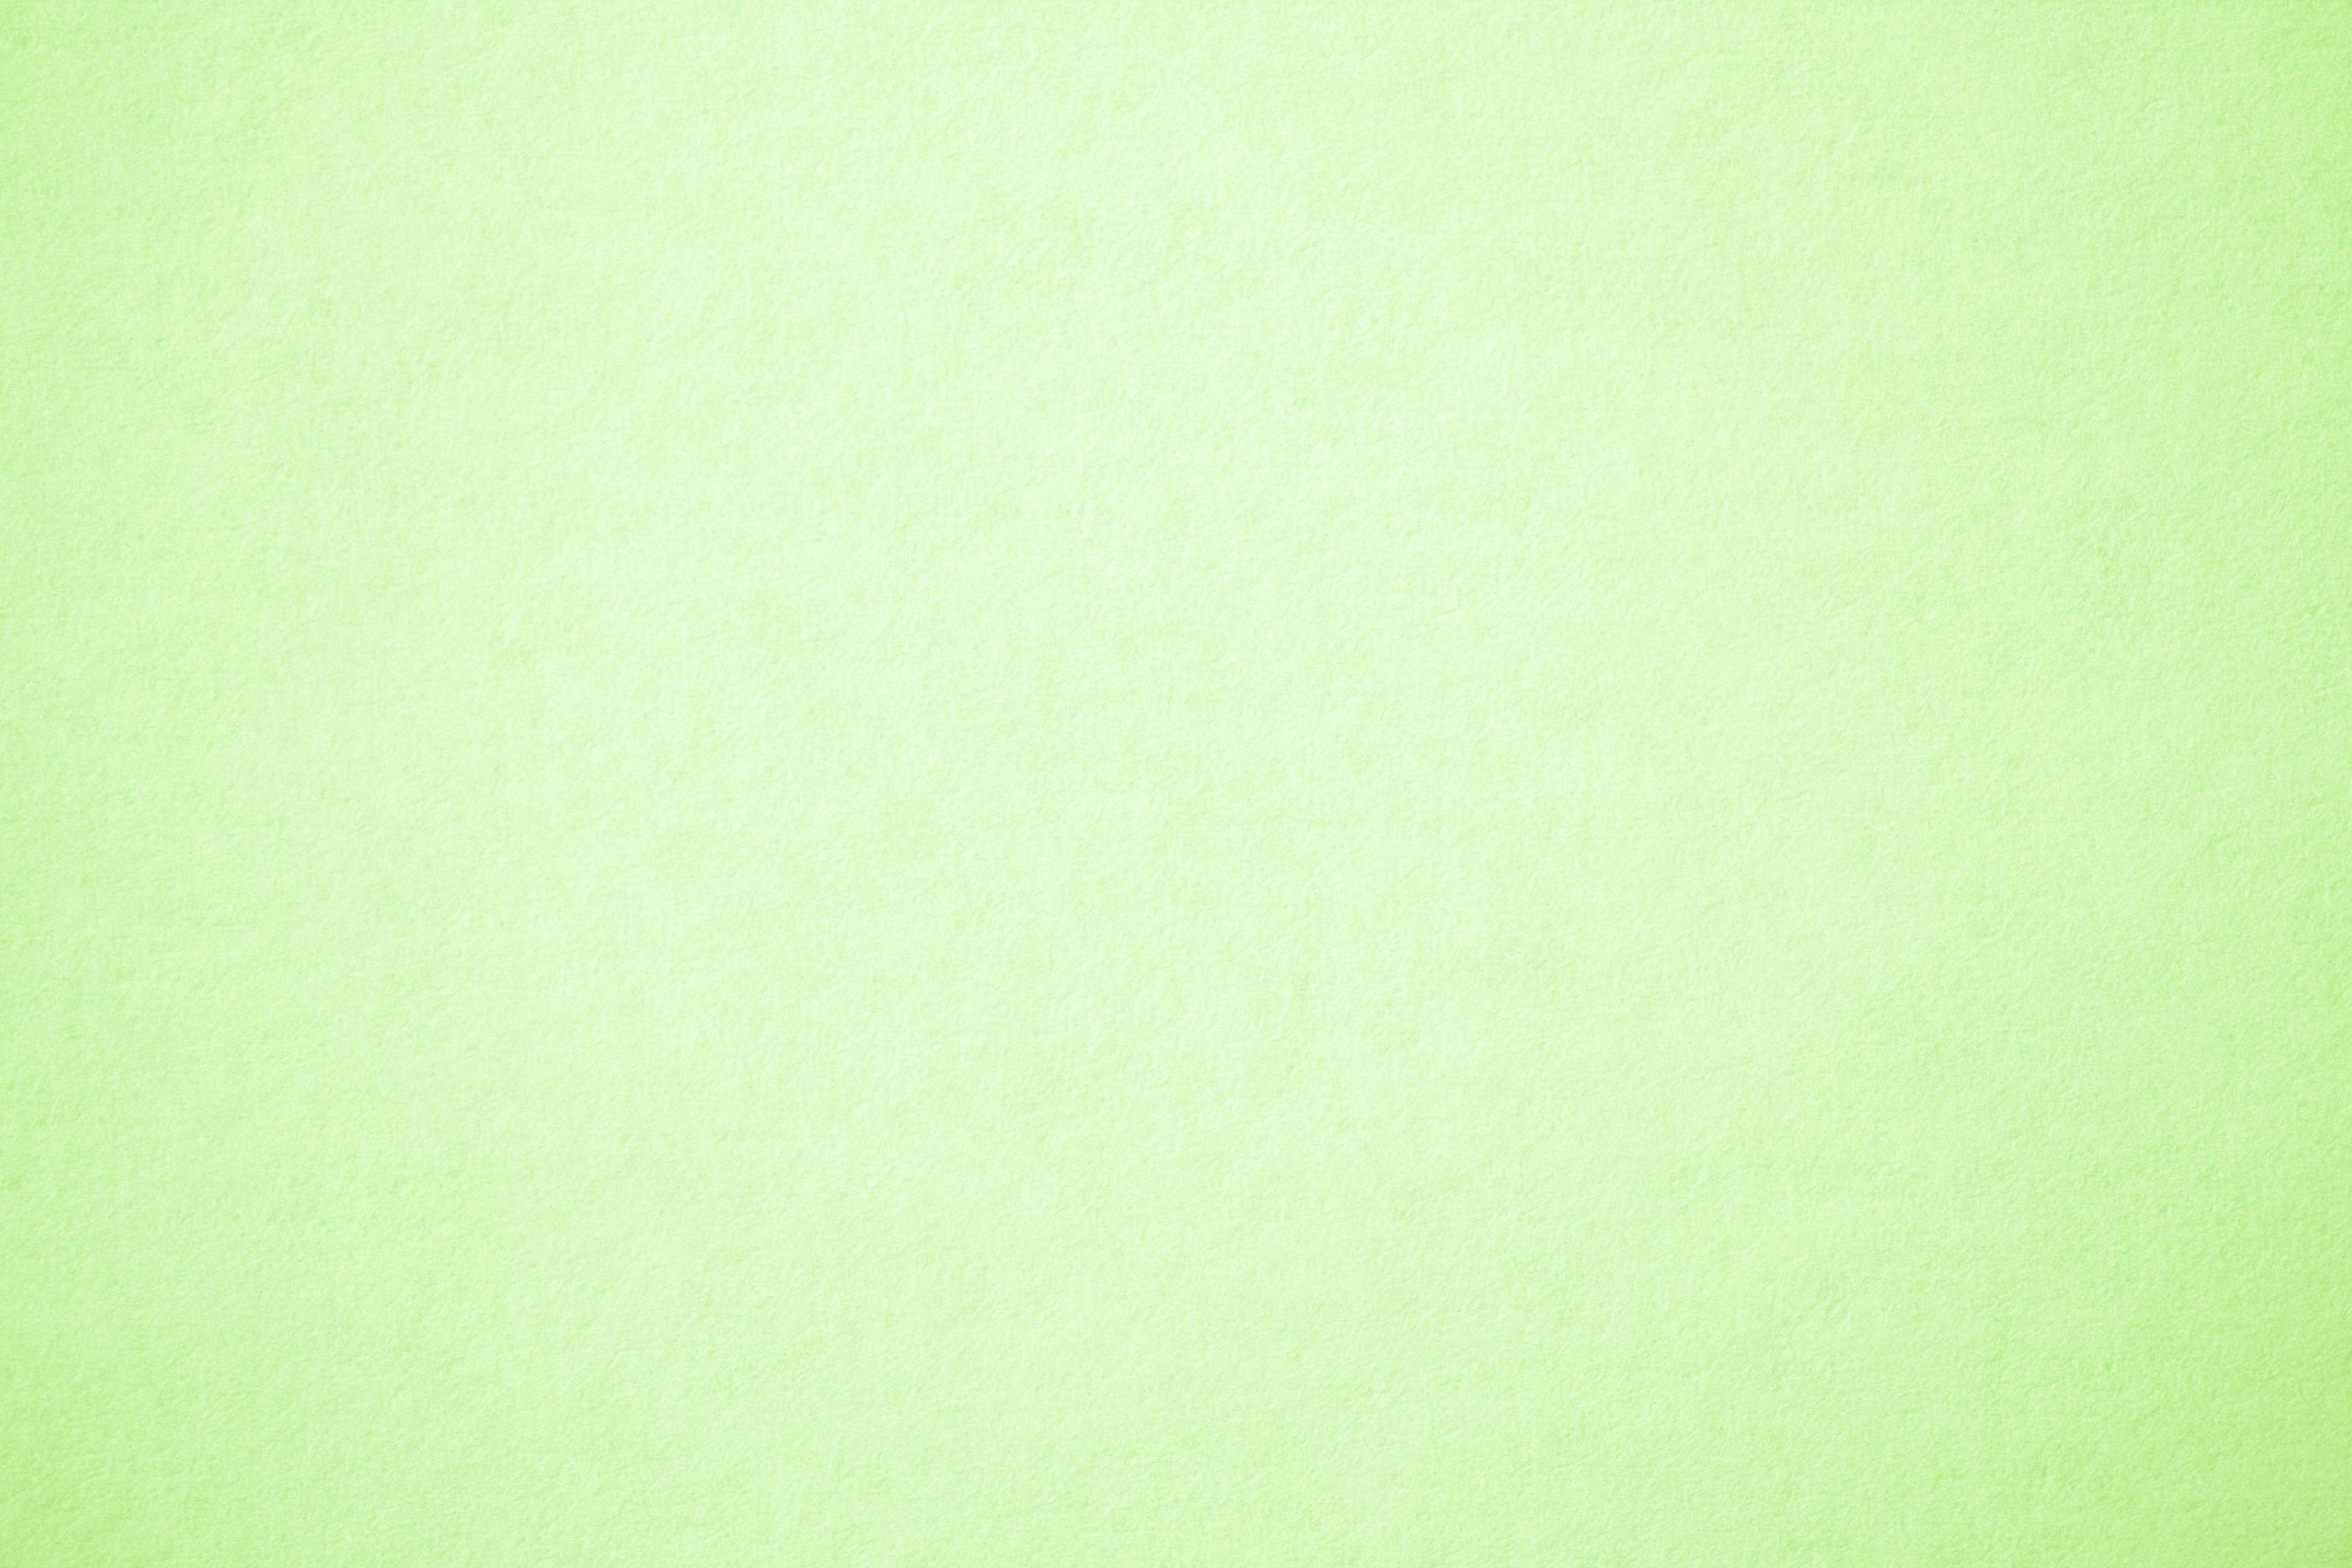 Pastel Green Paper Texture Picture, Free Photograph